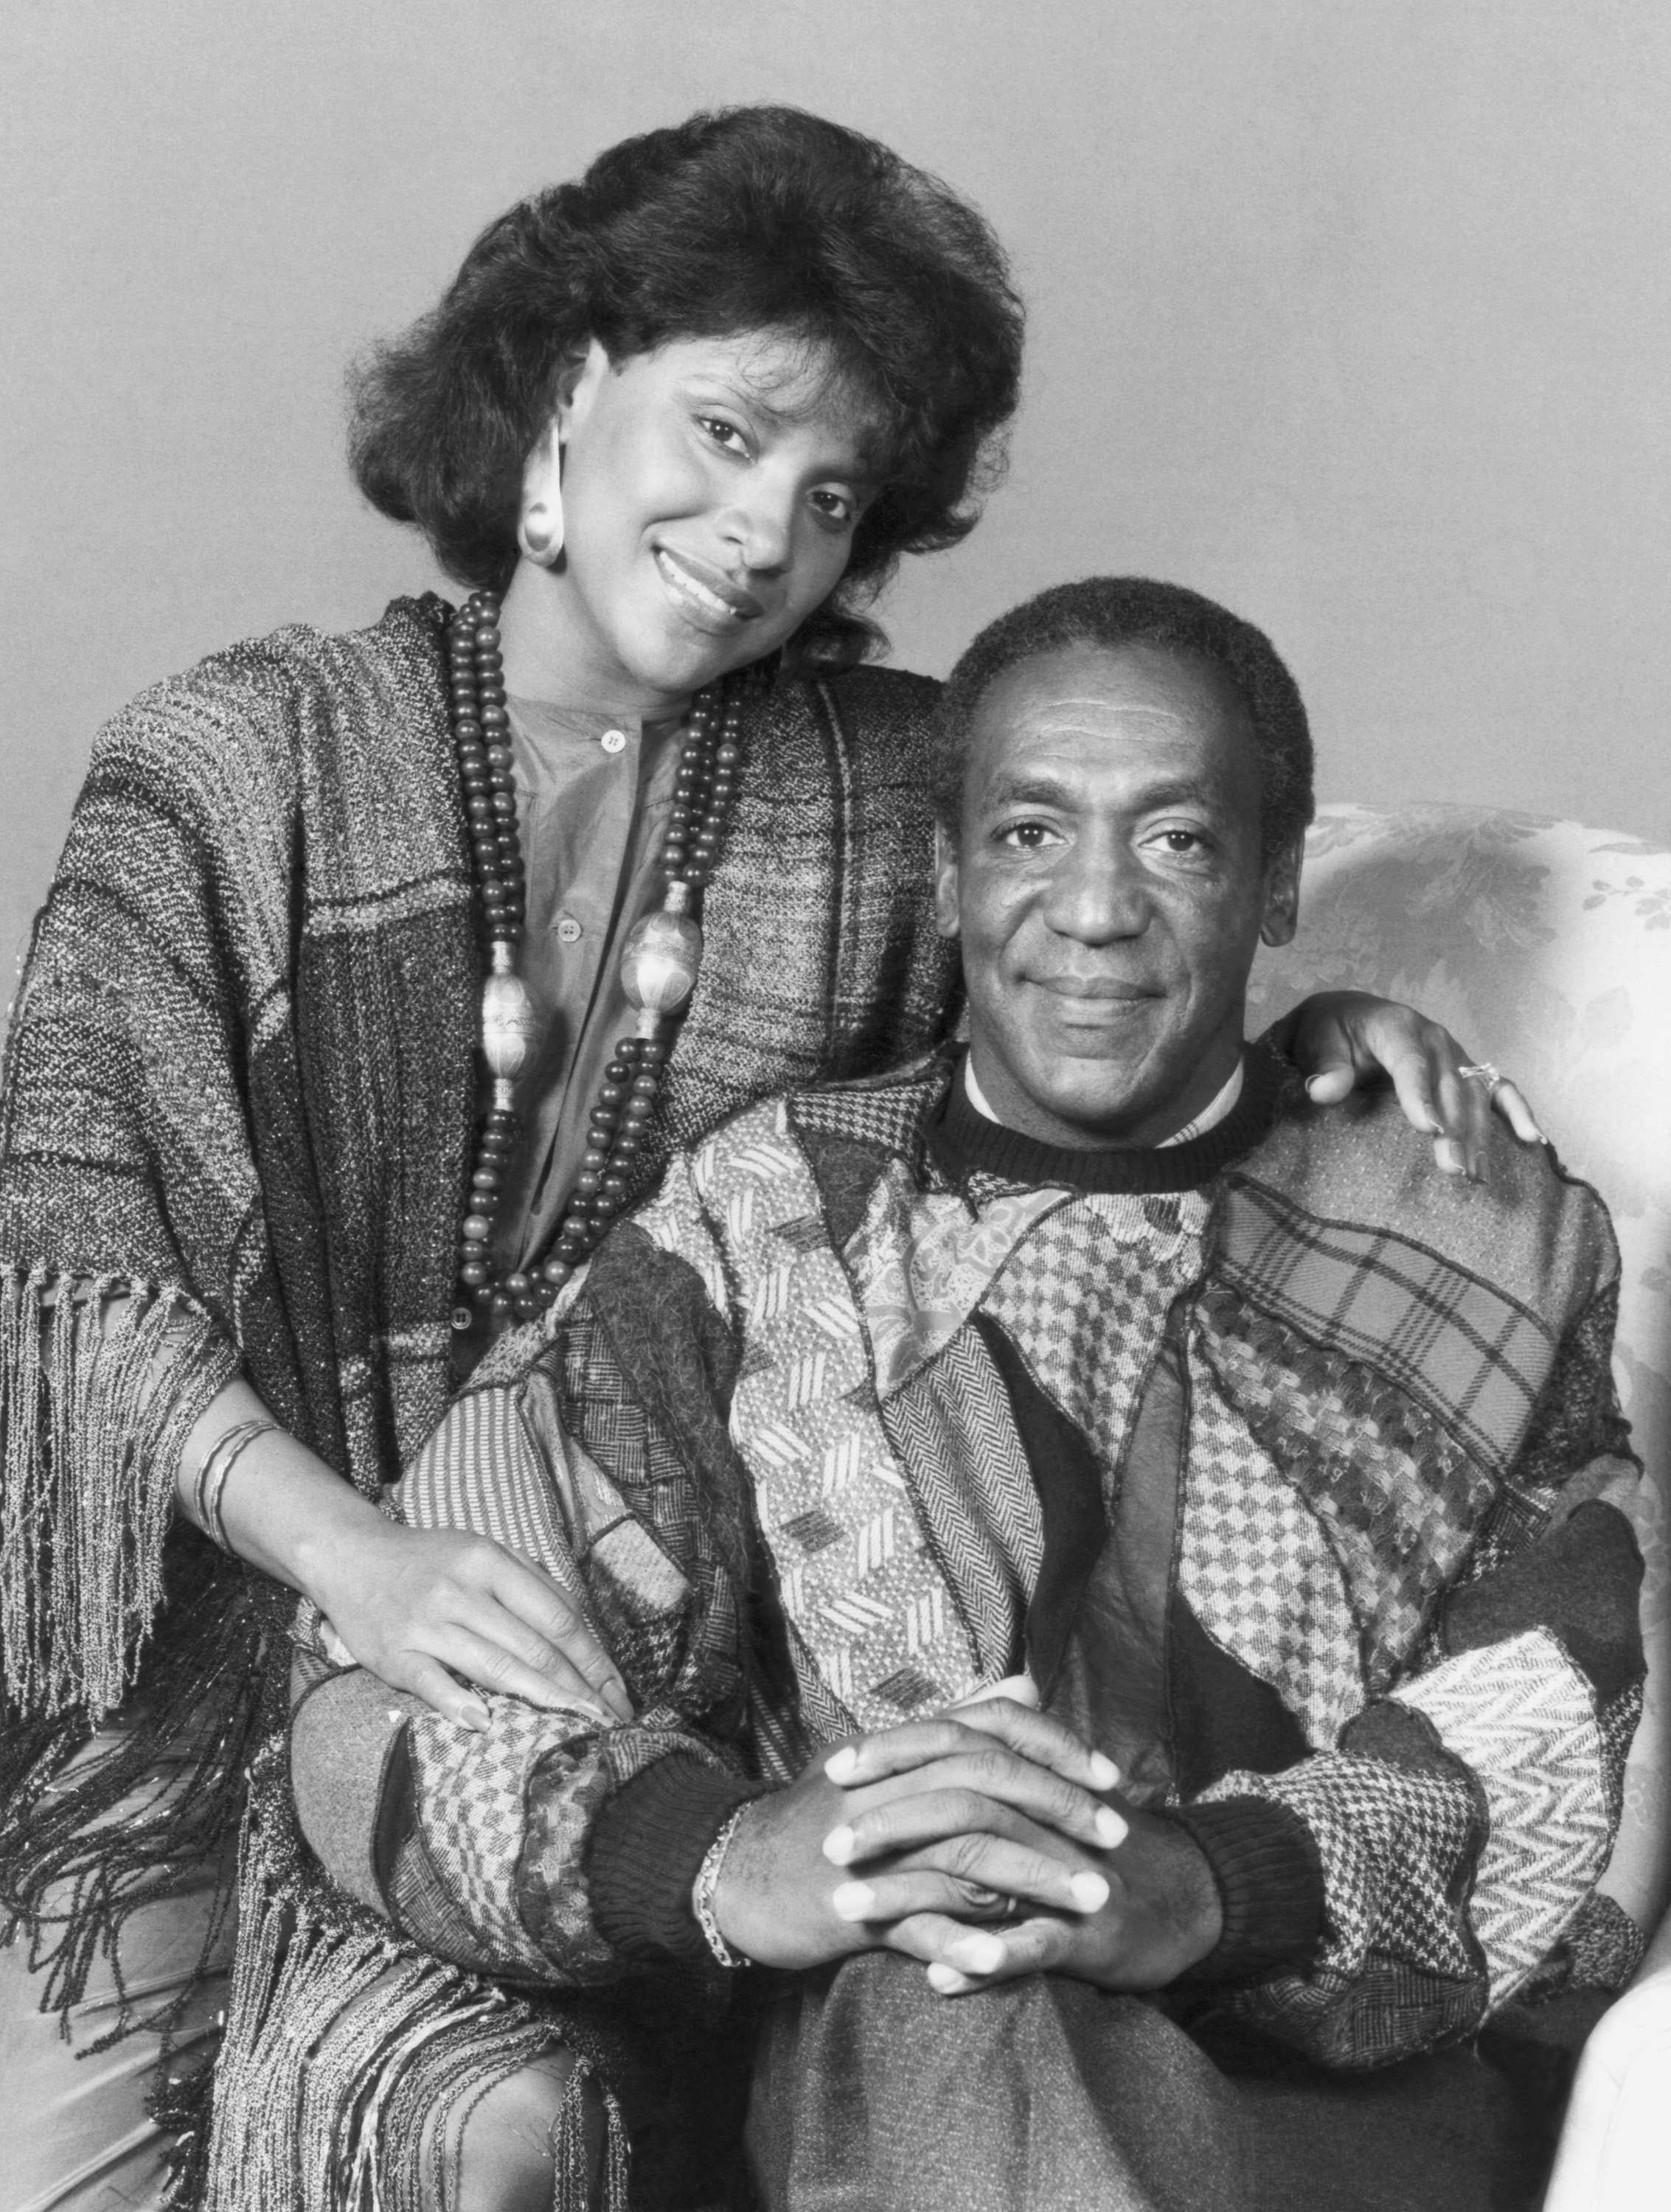 Phylicia Rashad as Clair Hanks Huxtable, Bill Cosby as Dr. Heathcliff 'Cliff' Huxtable on "The Cosby Show" | Photo: GettyImages 